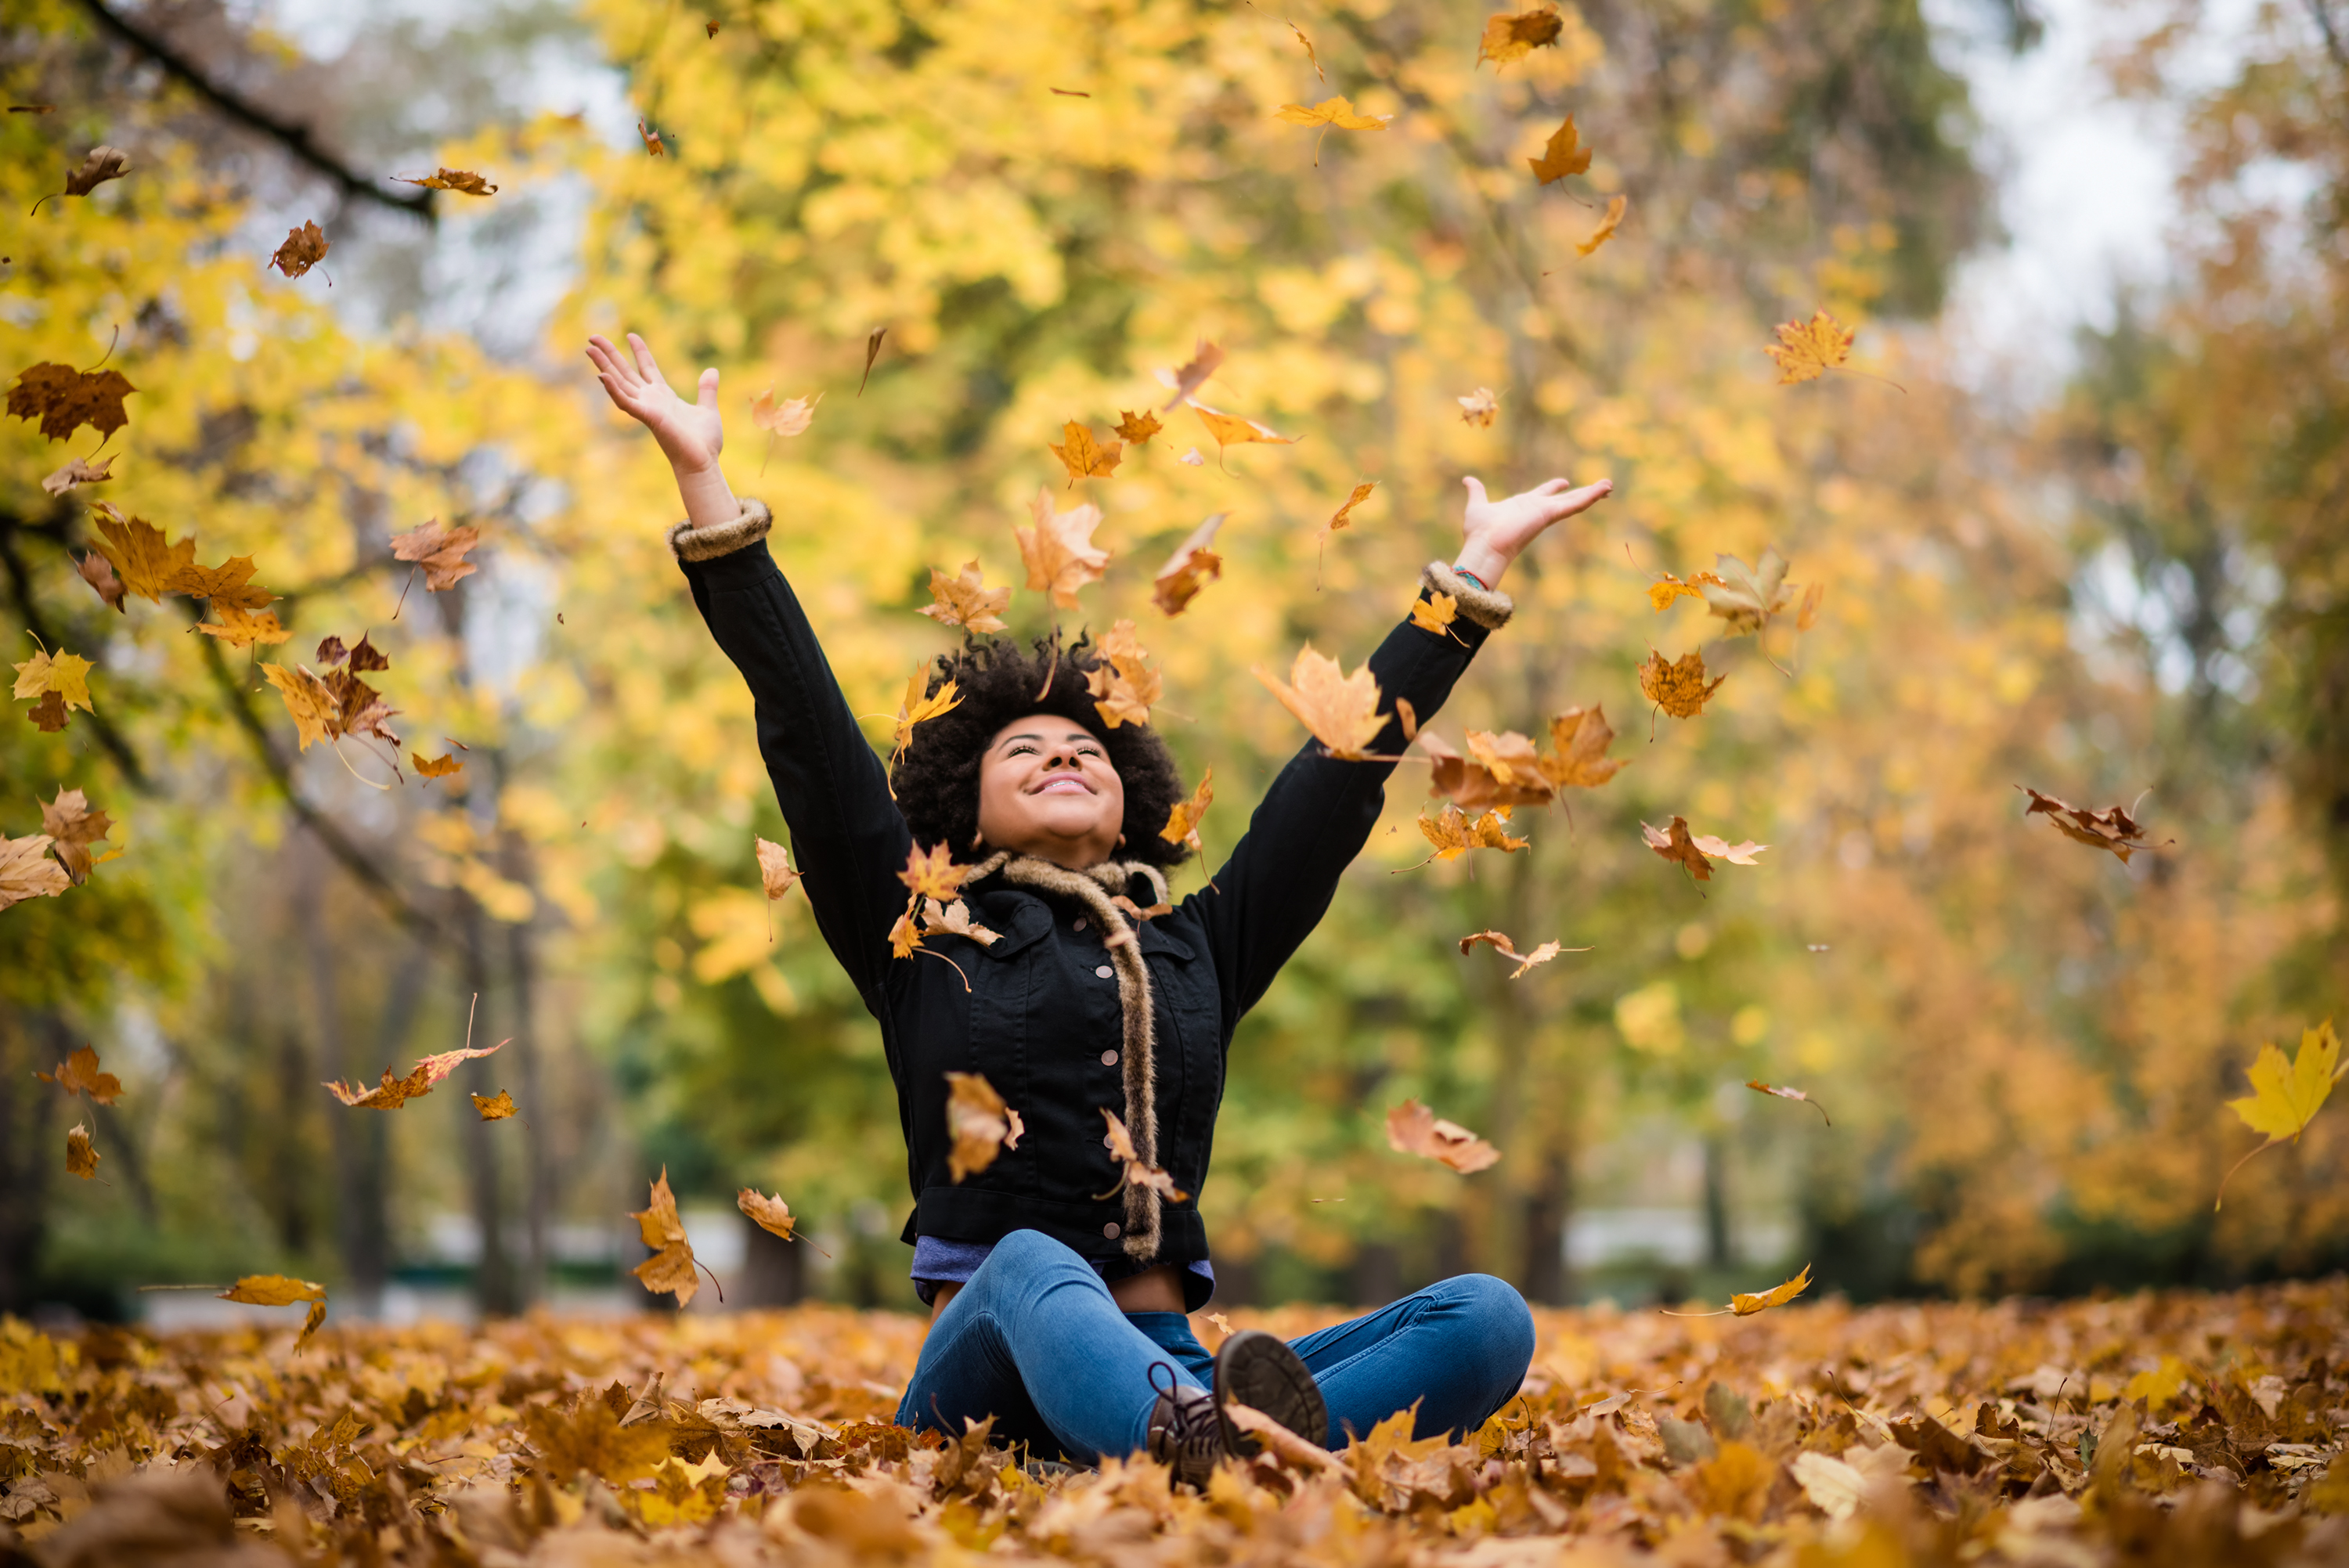 Student sitting in fall leaves and throwing leaves in the air